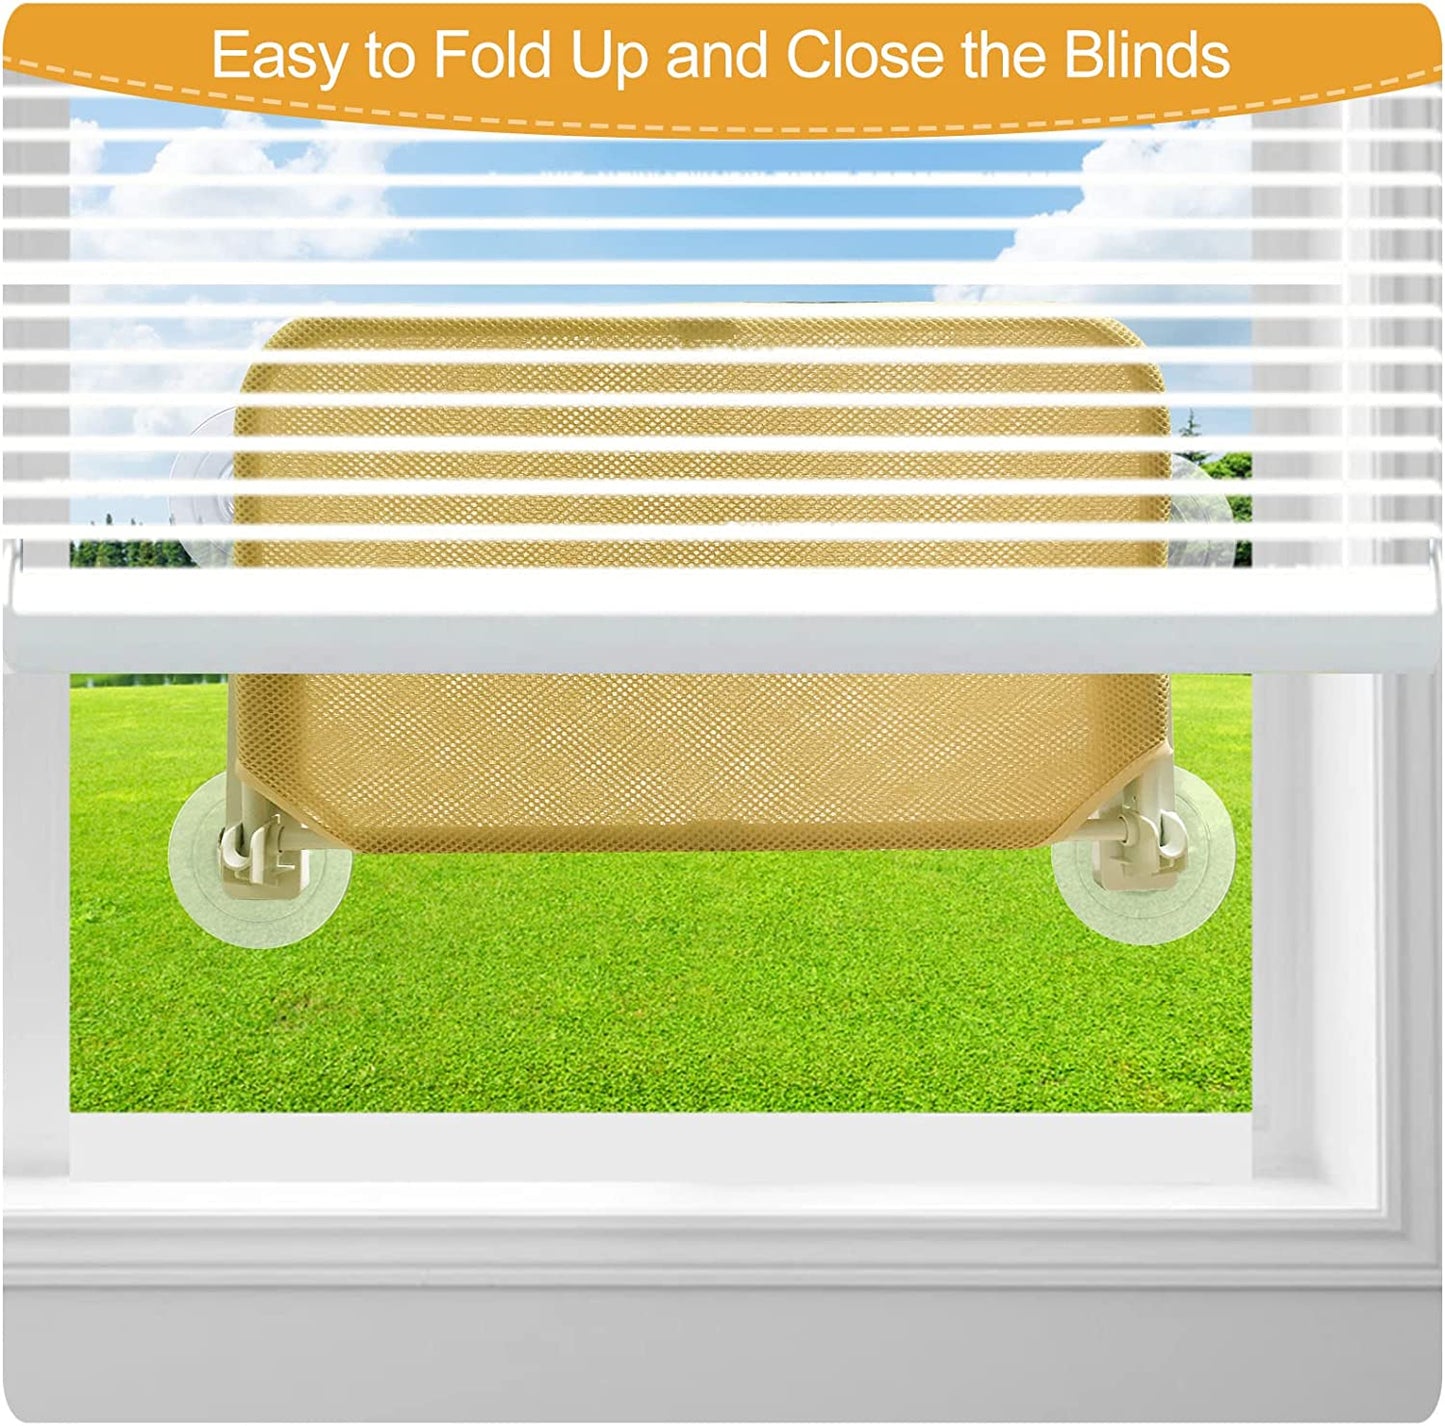 Foldable Cat Window Perch Hammock With Strong Suction Cups